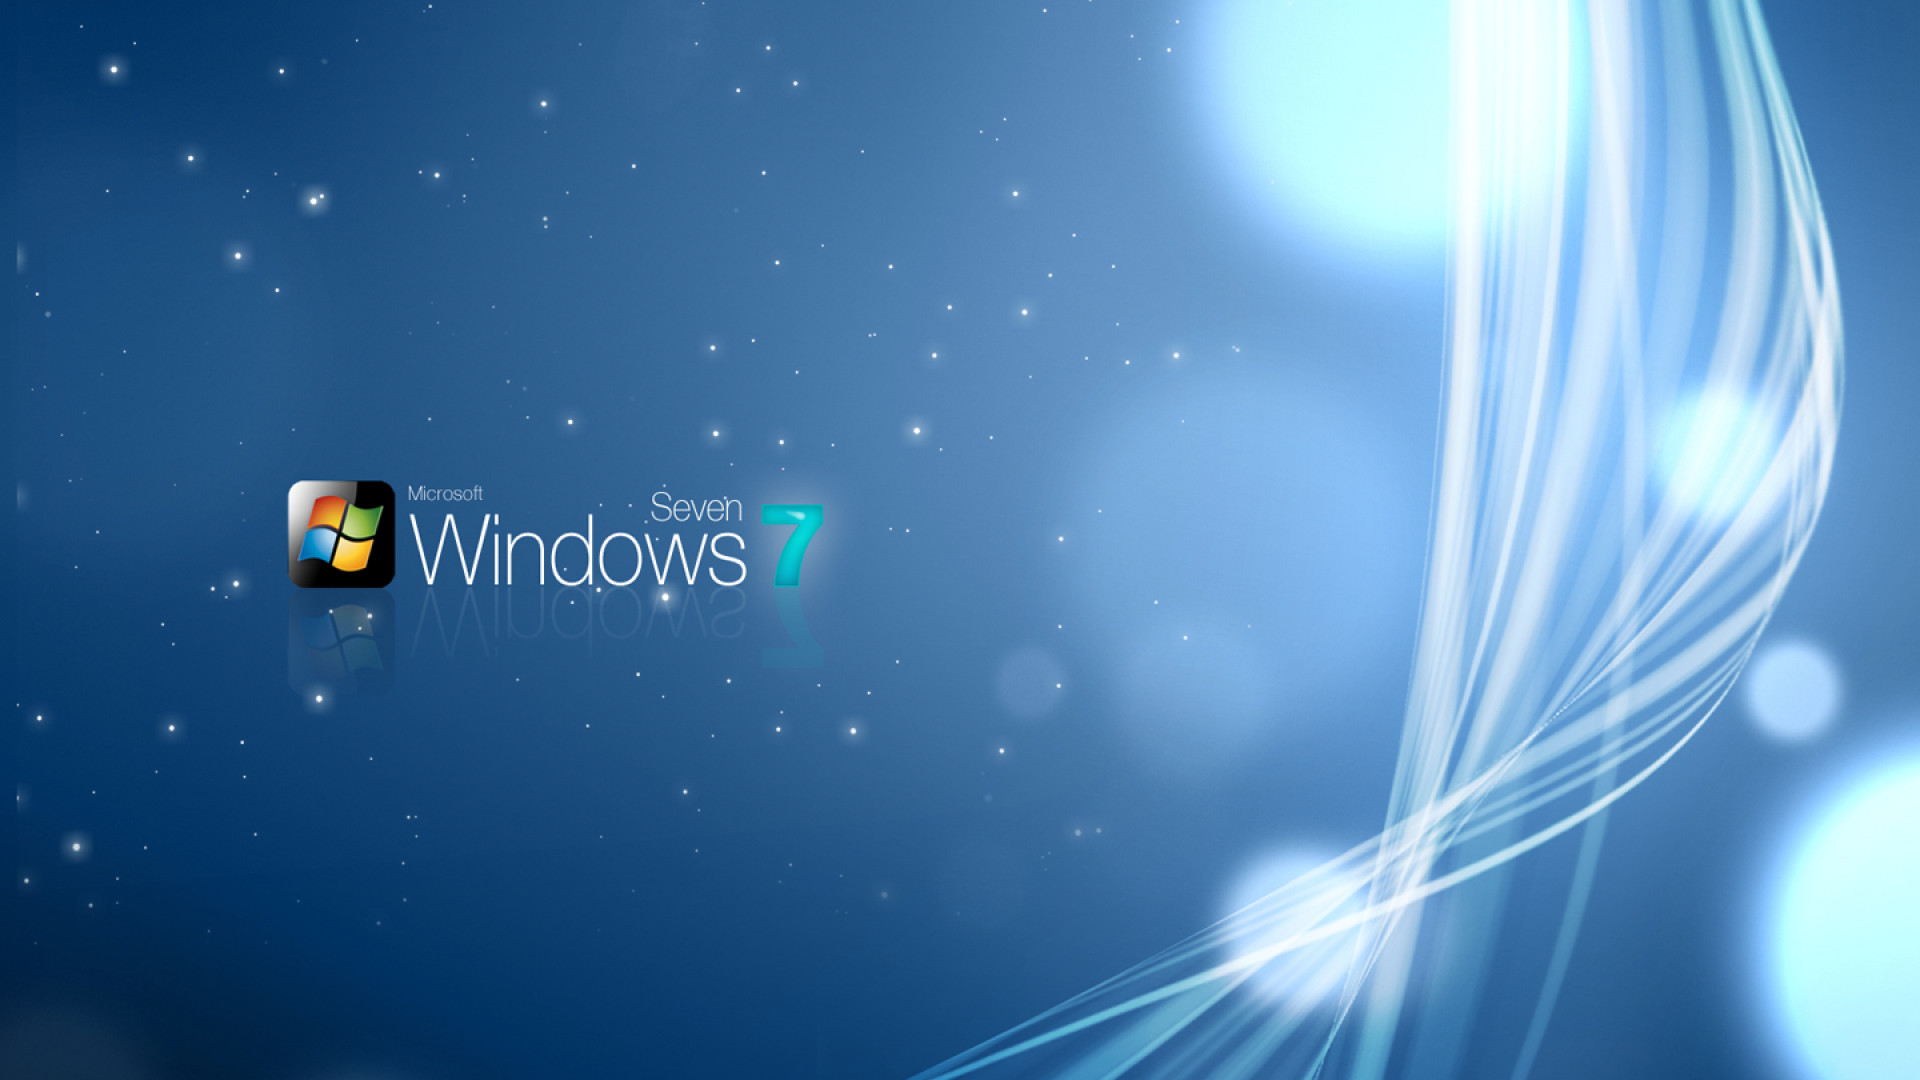 1920x1080 Windows 7 Sparkly Wallpaper - HD Wallpapers